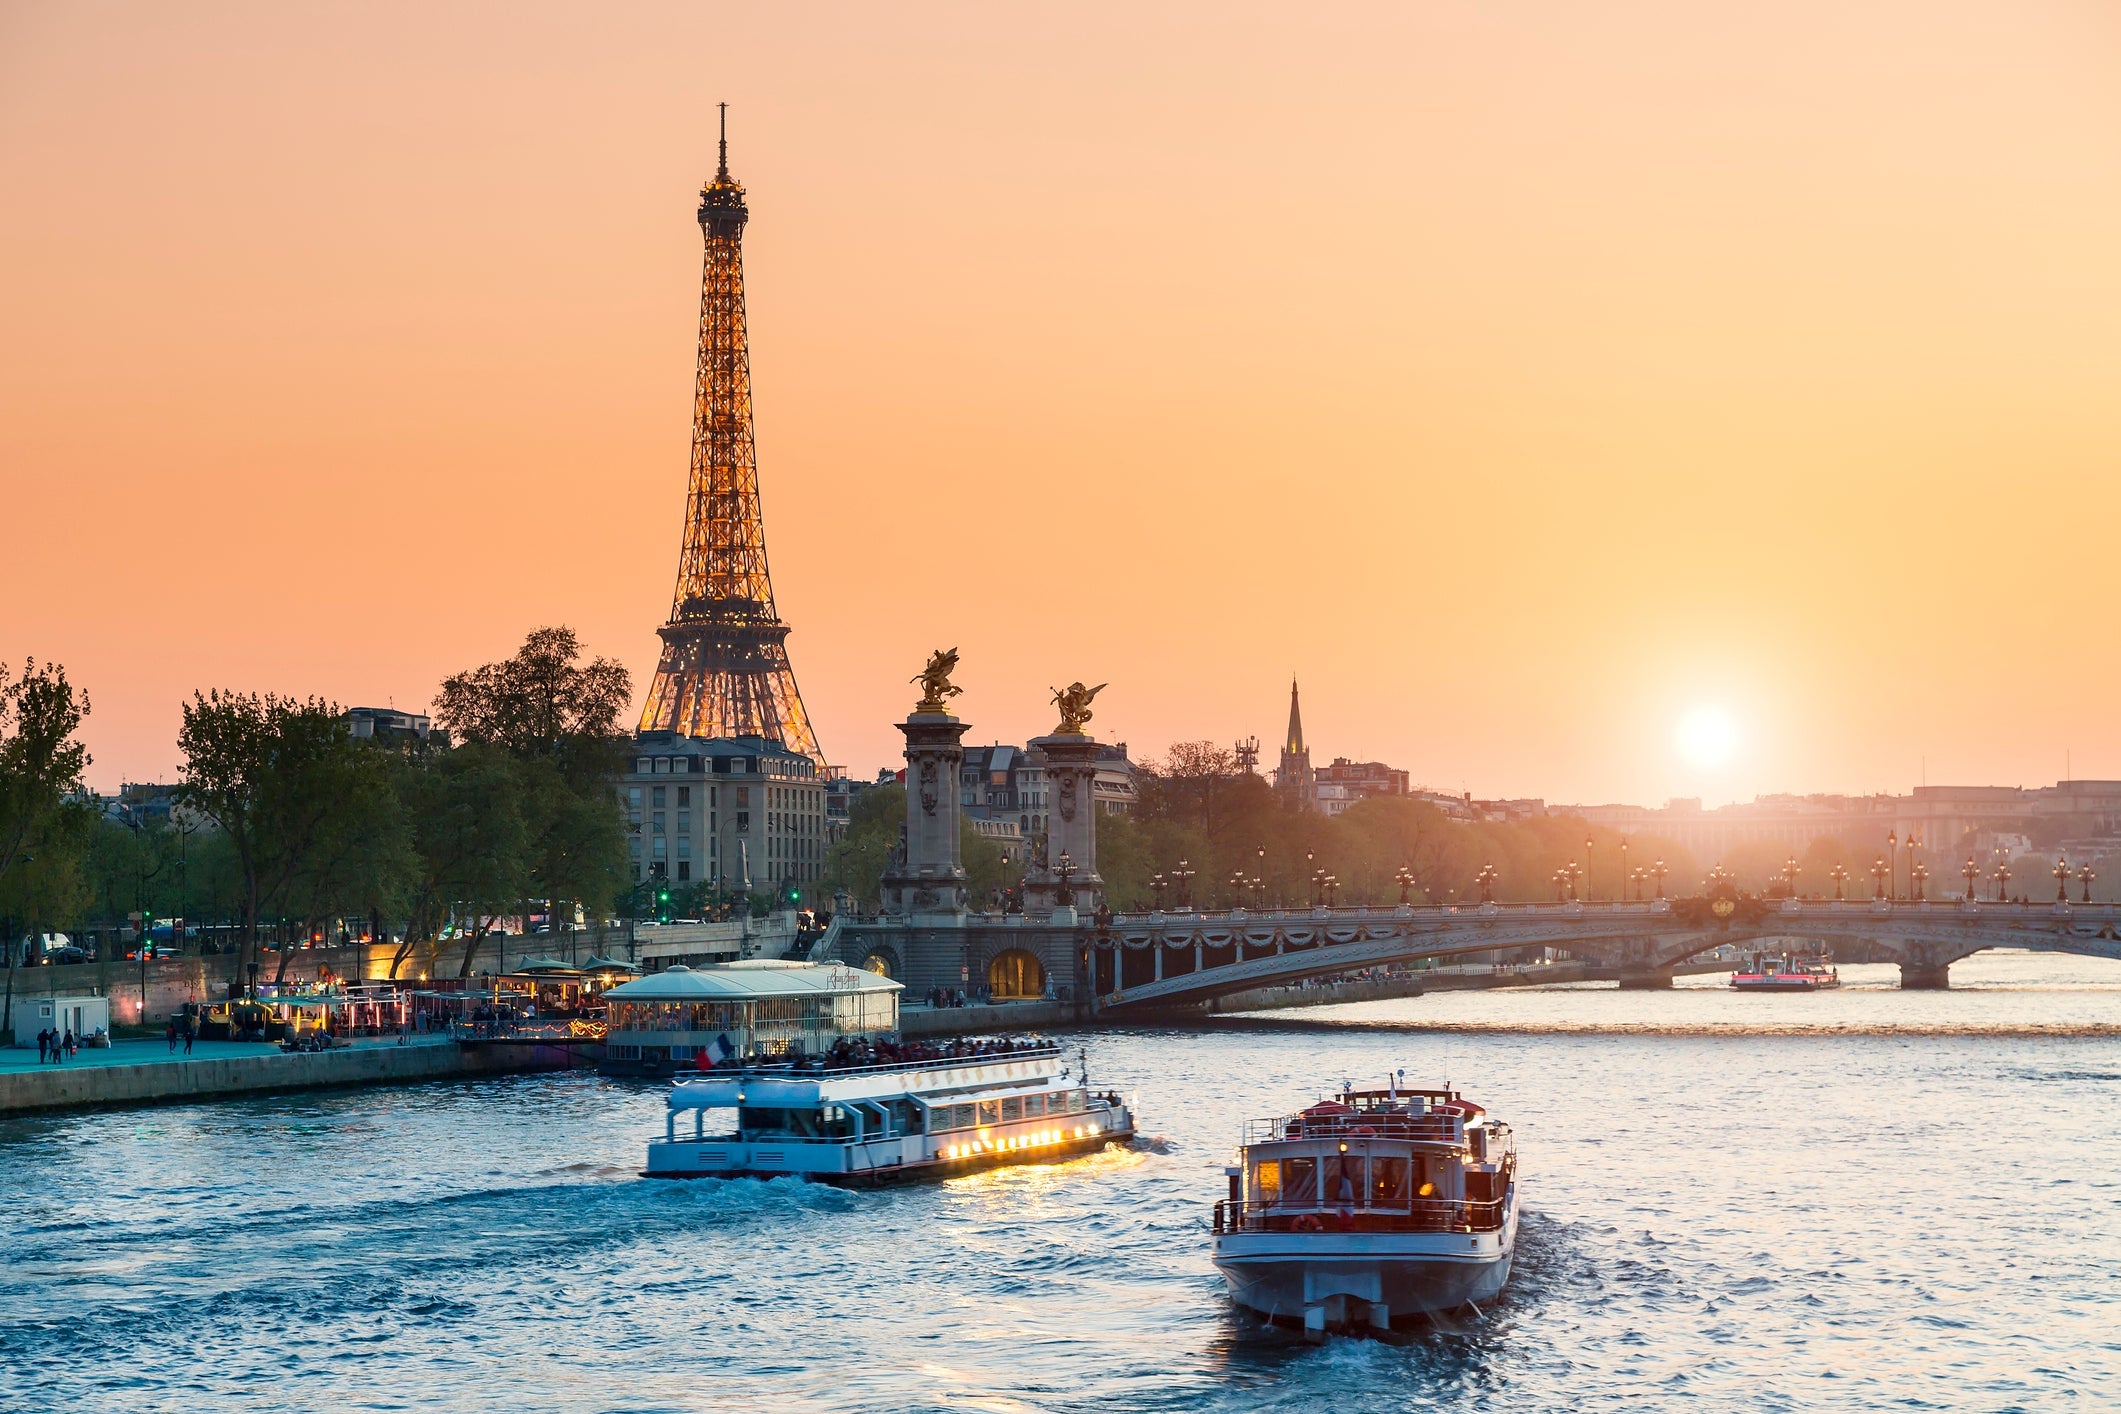 A sunset over the River Seine in Paris, France.